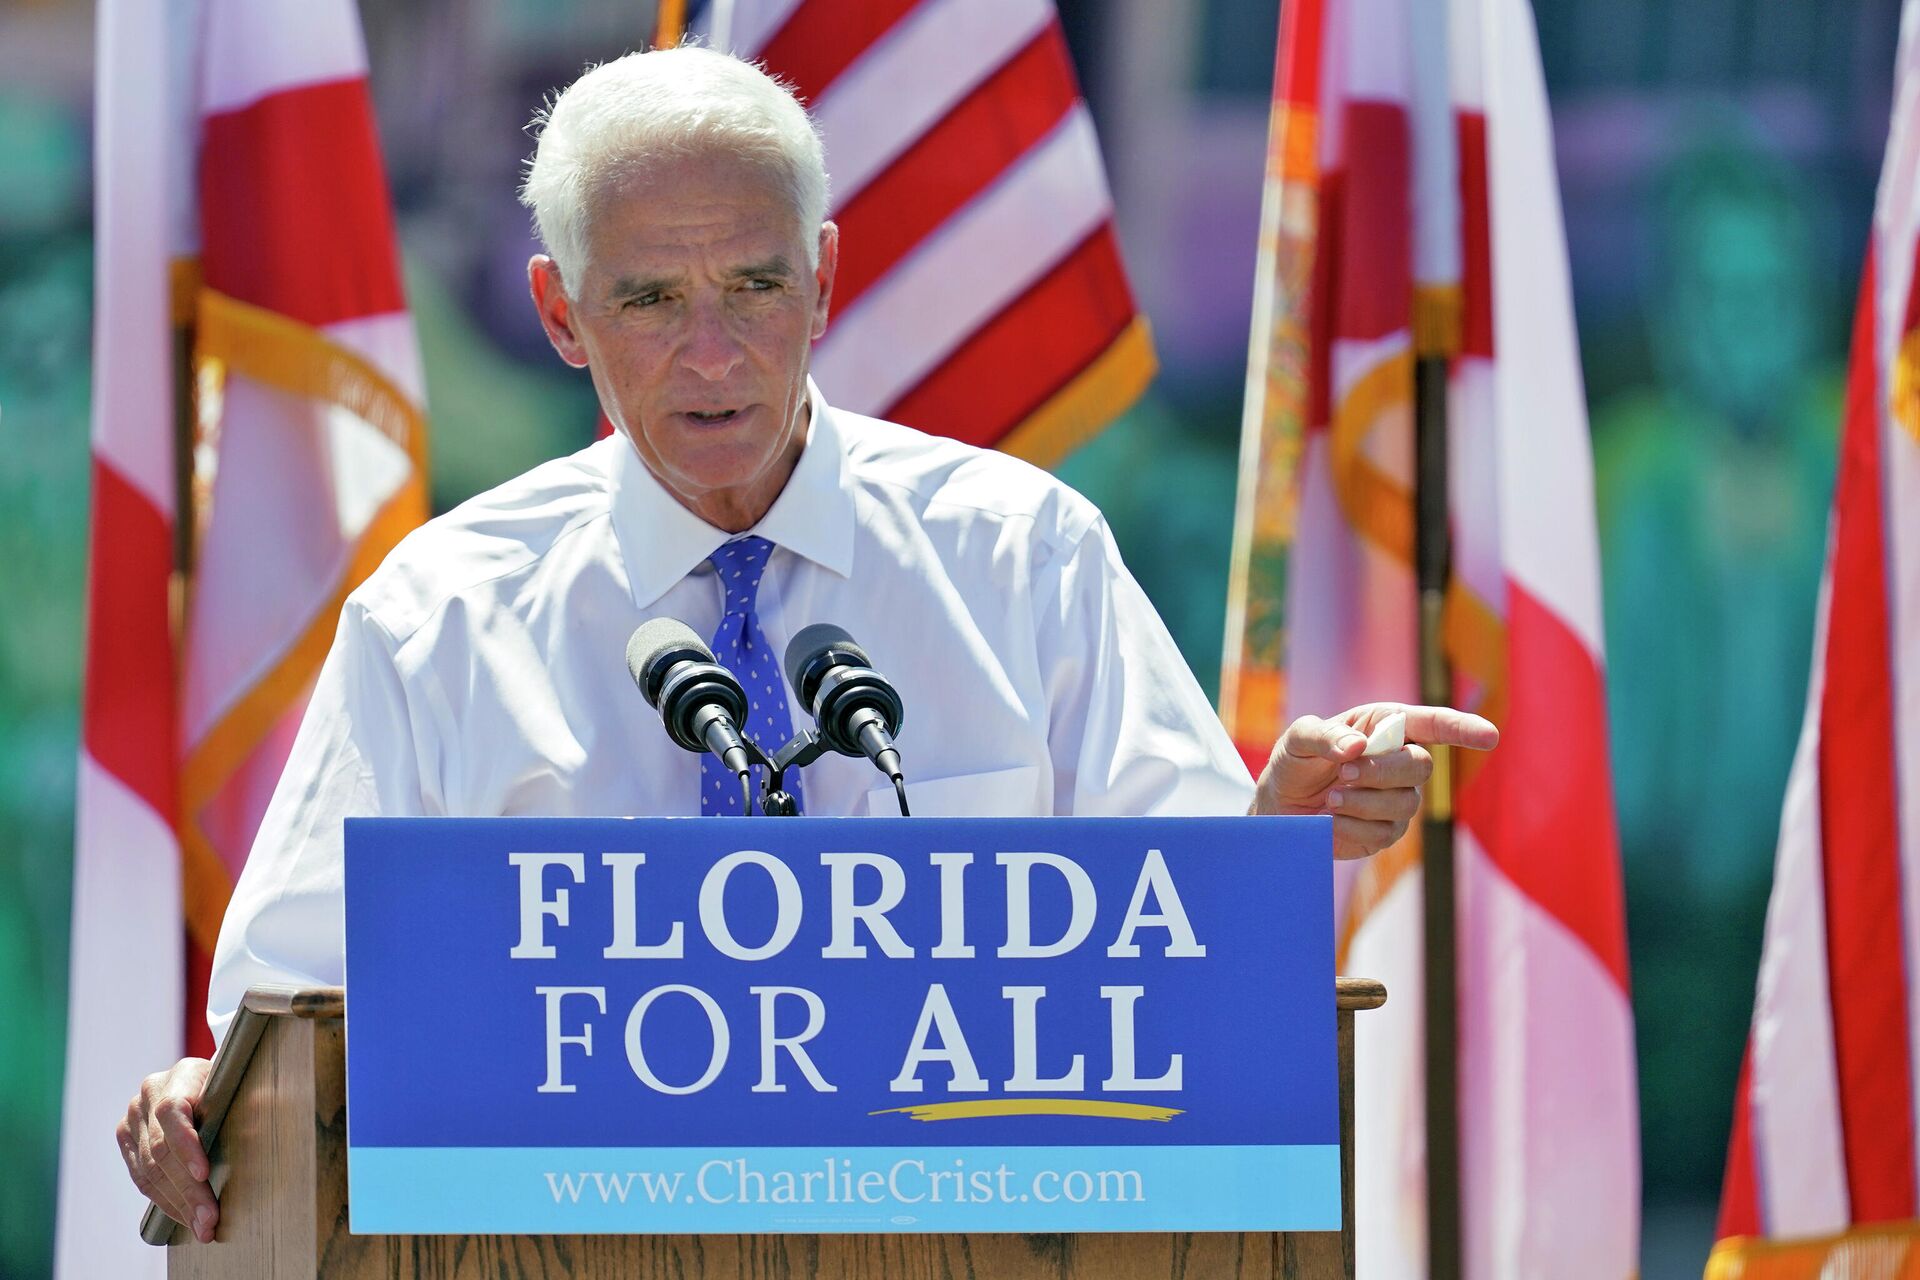 U.S. Rep. Charlie Crist, D-St. Petersburg, gestures while he speaks to supporters during a campaign rally as he announces his run for Florida governor Tuesday, May 4, 2021, in St. Petersburg, Fla. Crist, who served as Florida governor for a single term before running other offices, is seeking the state’s highest office once again — this time as a Democrat. - Sputnik International, 1920, 03.12.2021